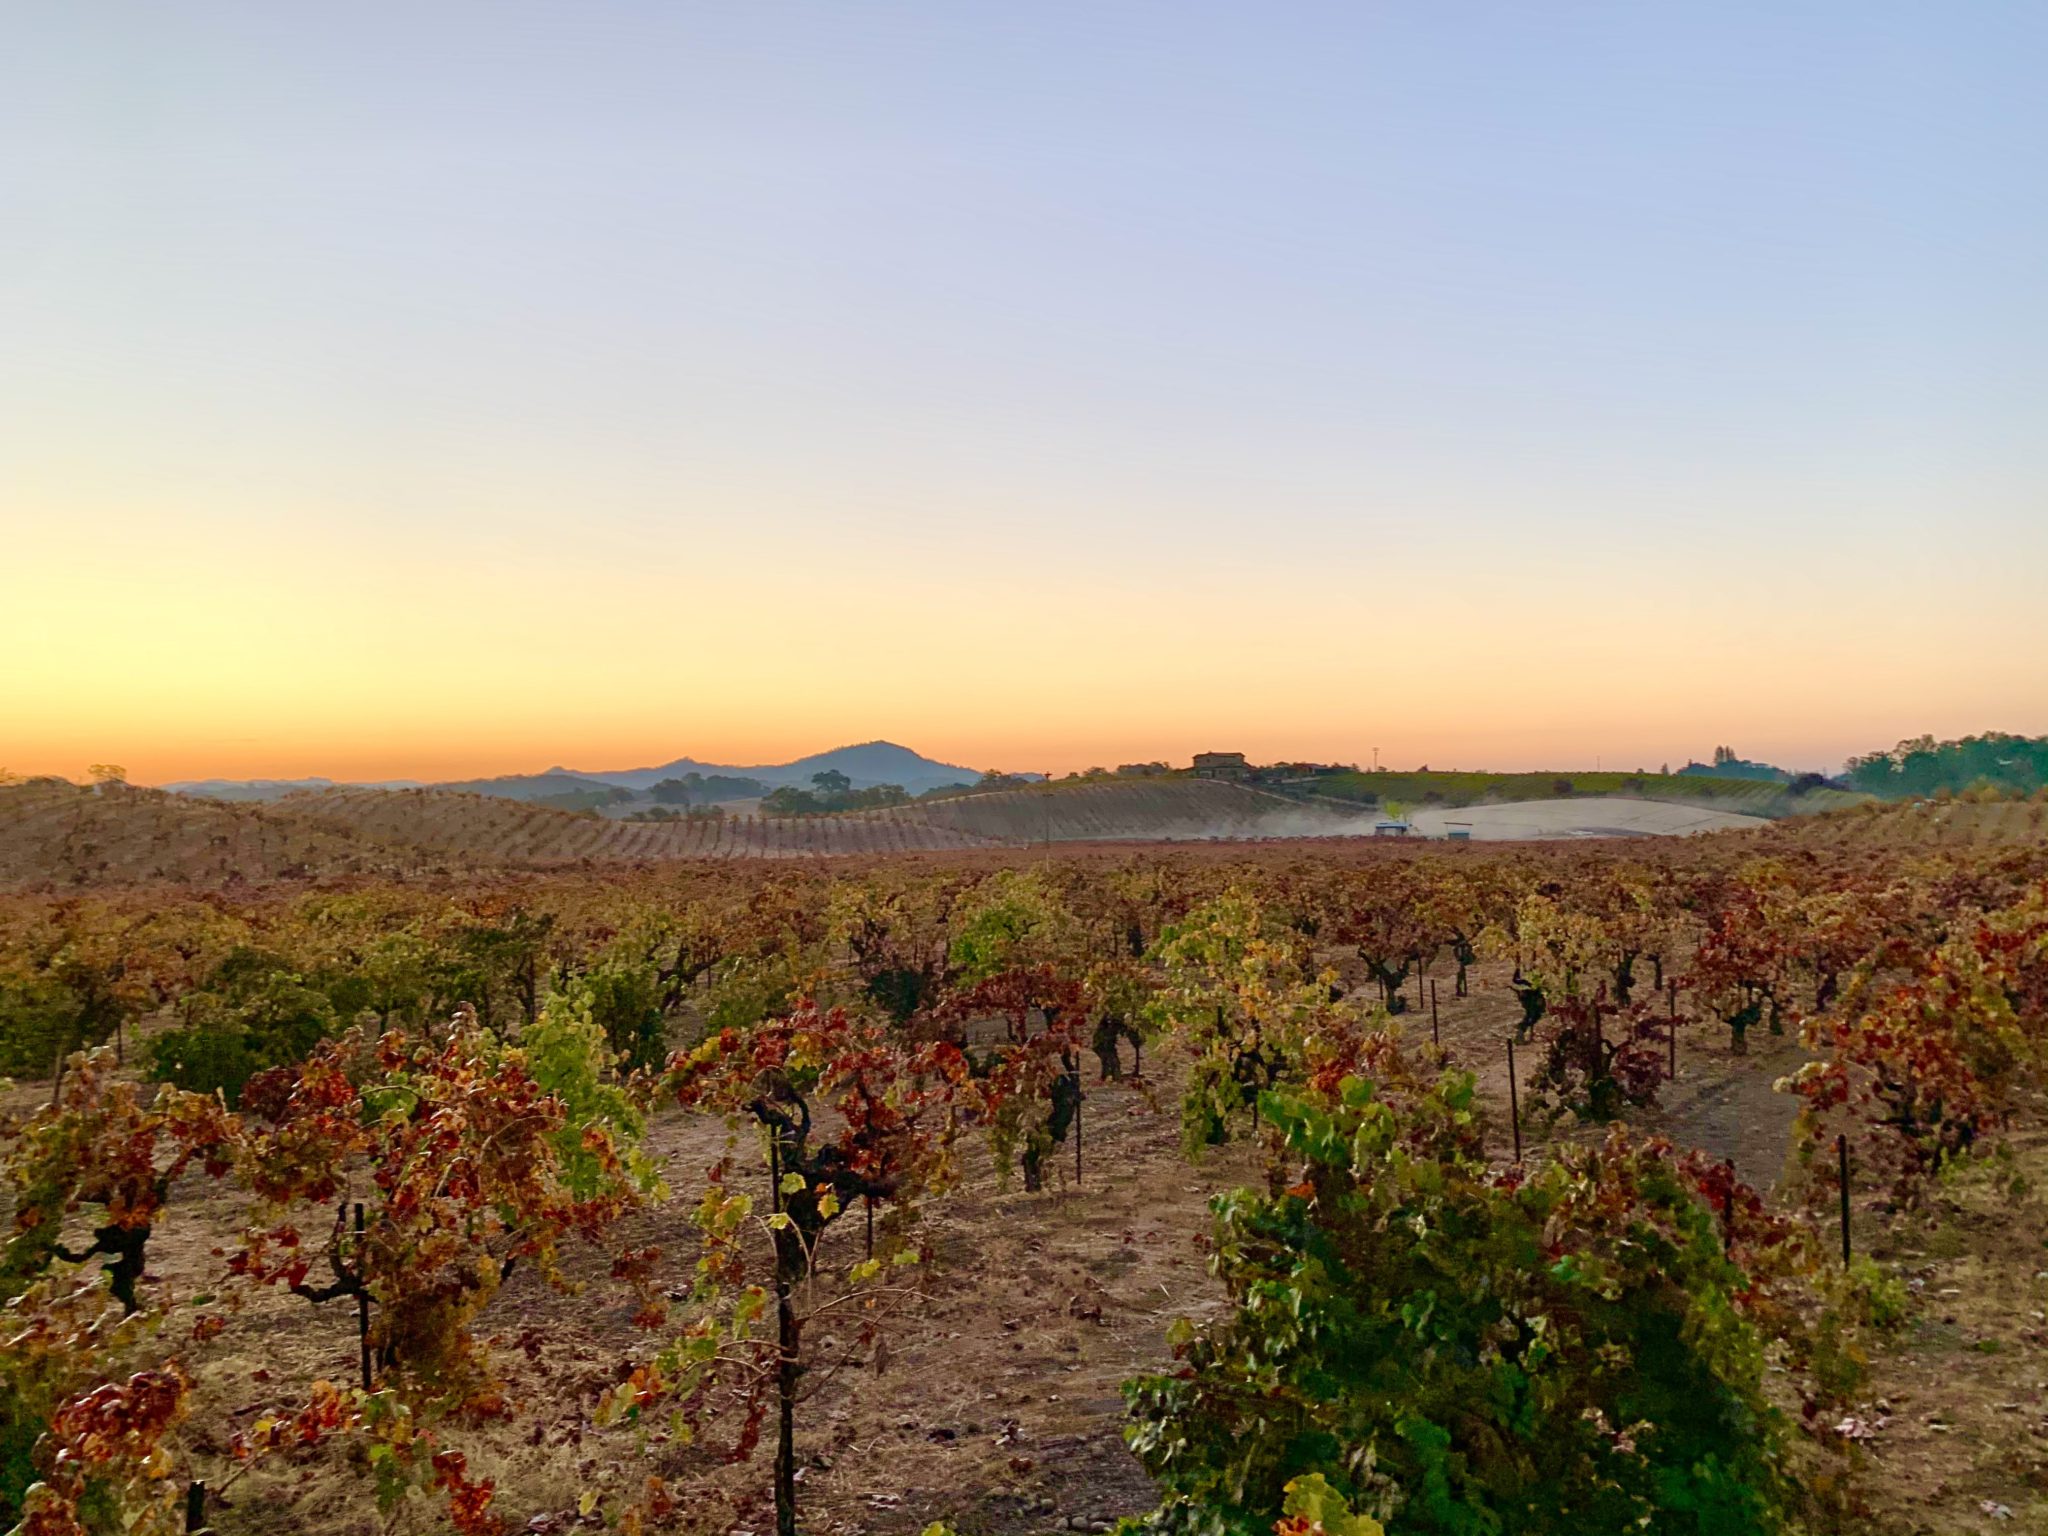 Colorful autumn leaves on wines at sunrise with winery in the background on a ridge. 